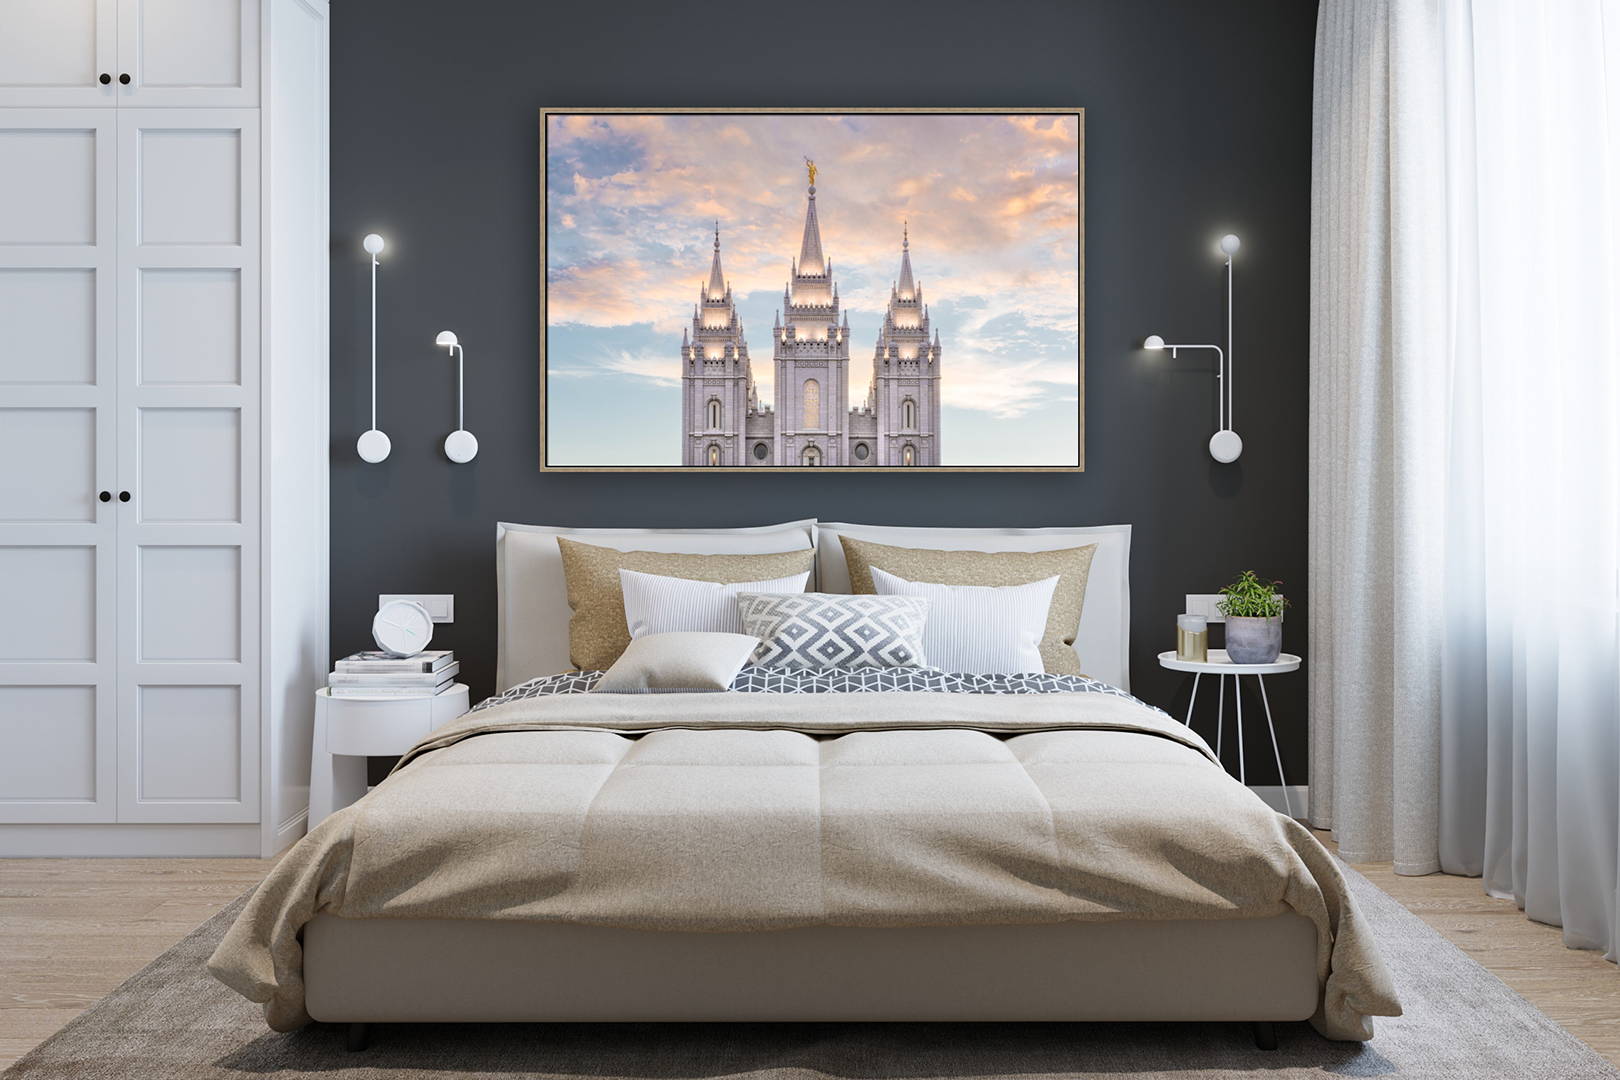 Salt Lake City Temple picture hanging above a bed.